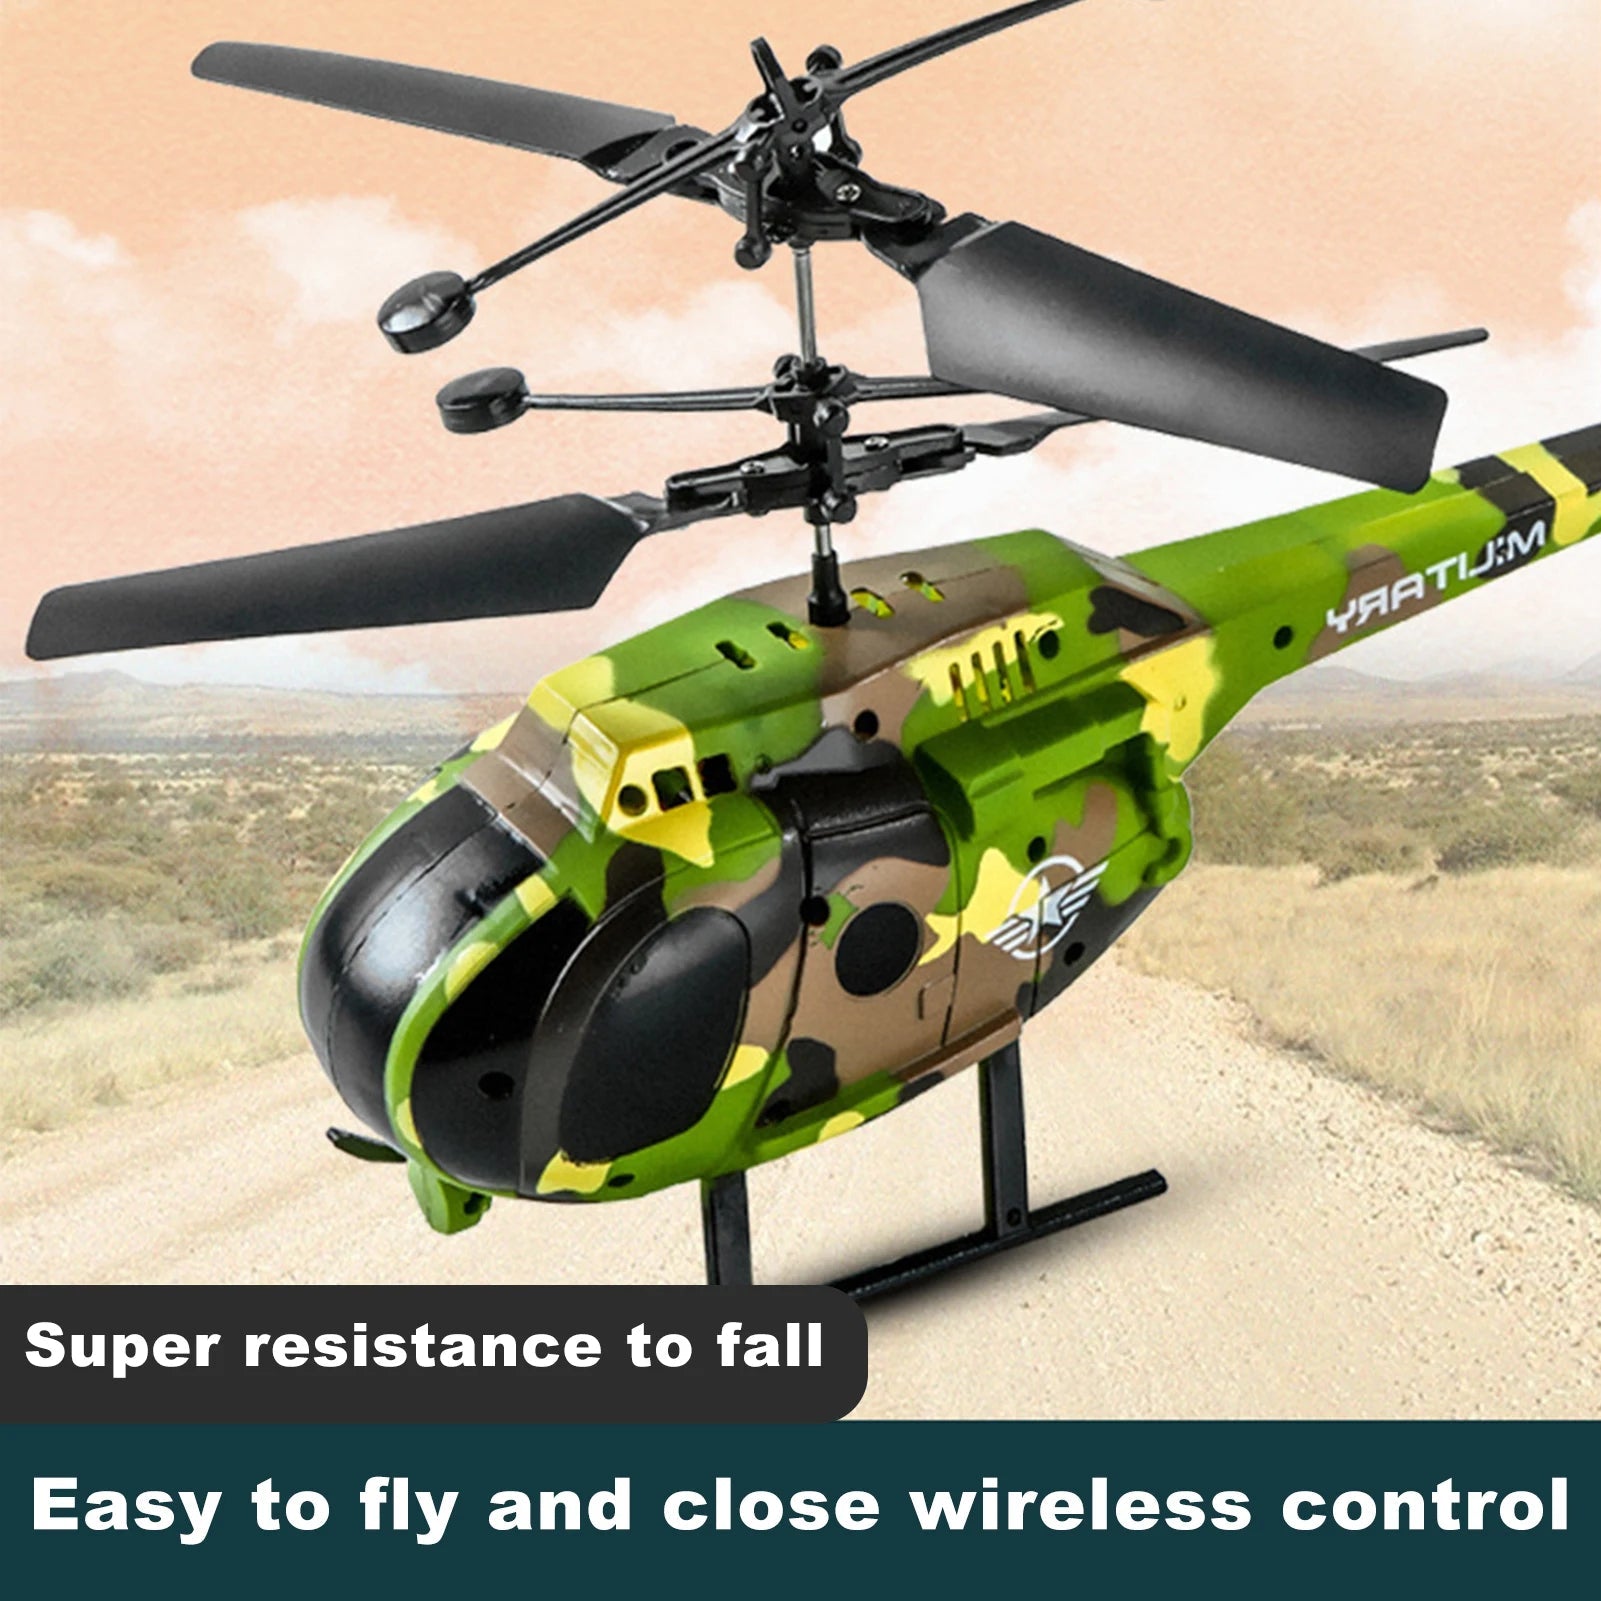 Rc Helicopter 2Ch Remote Control Plane Electric Airplane Flying Rescue - ToylandEU